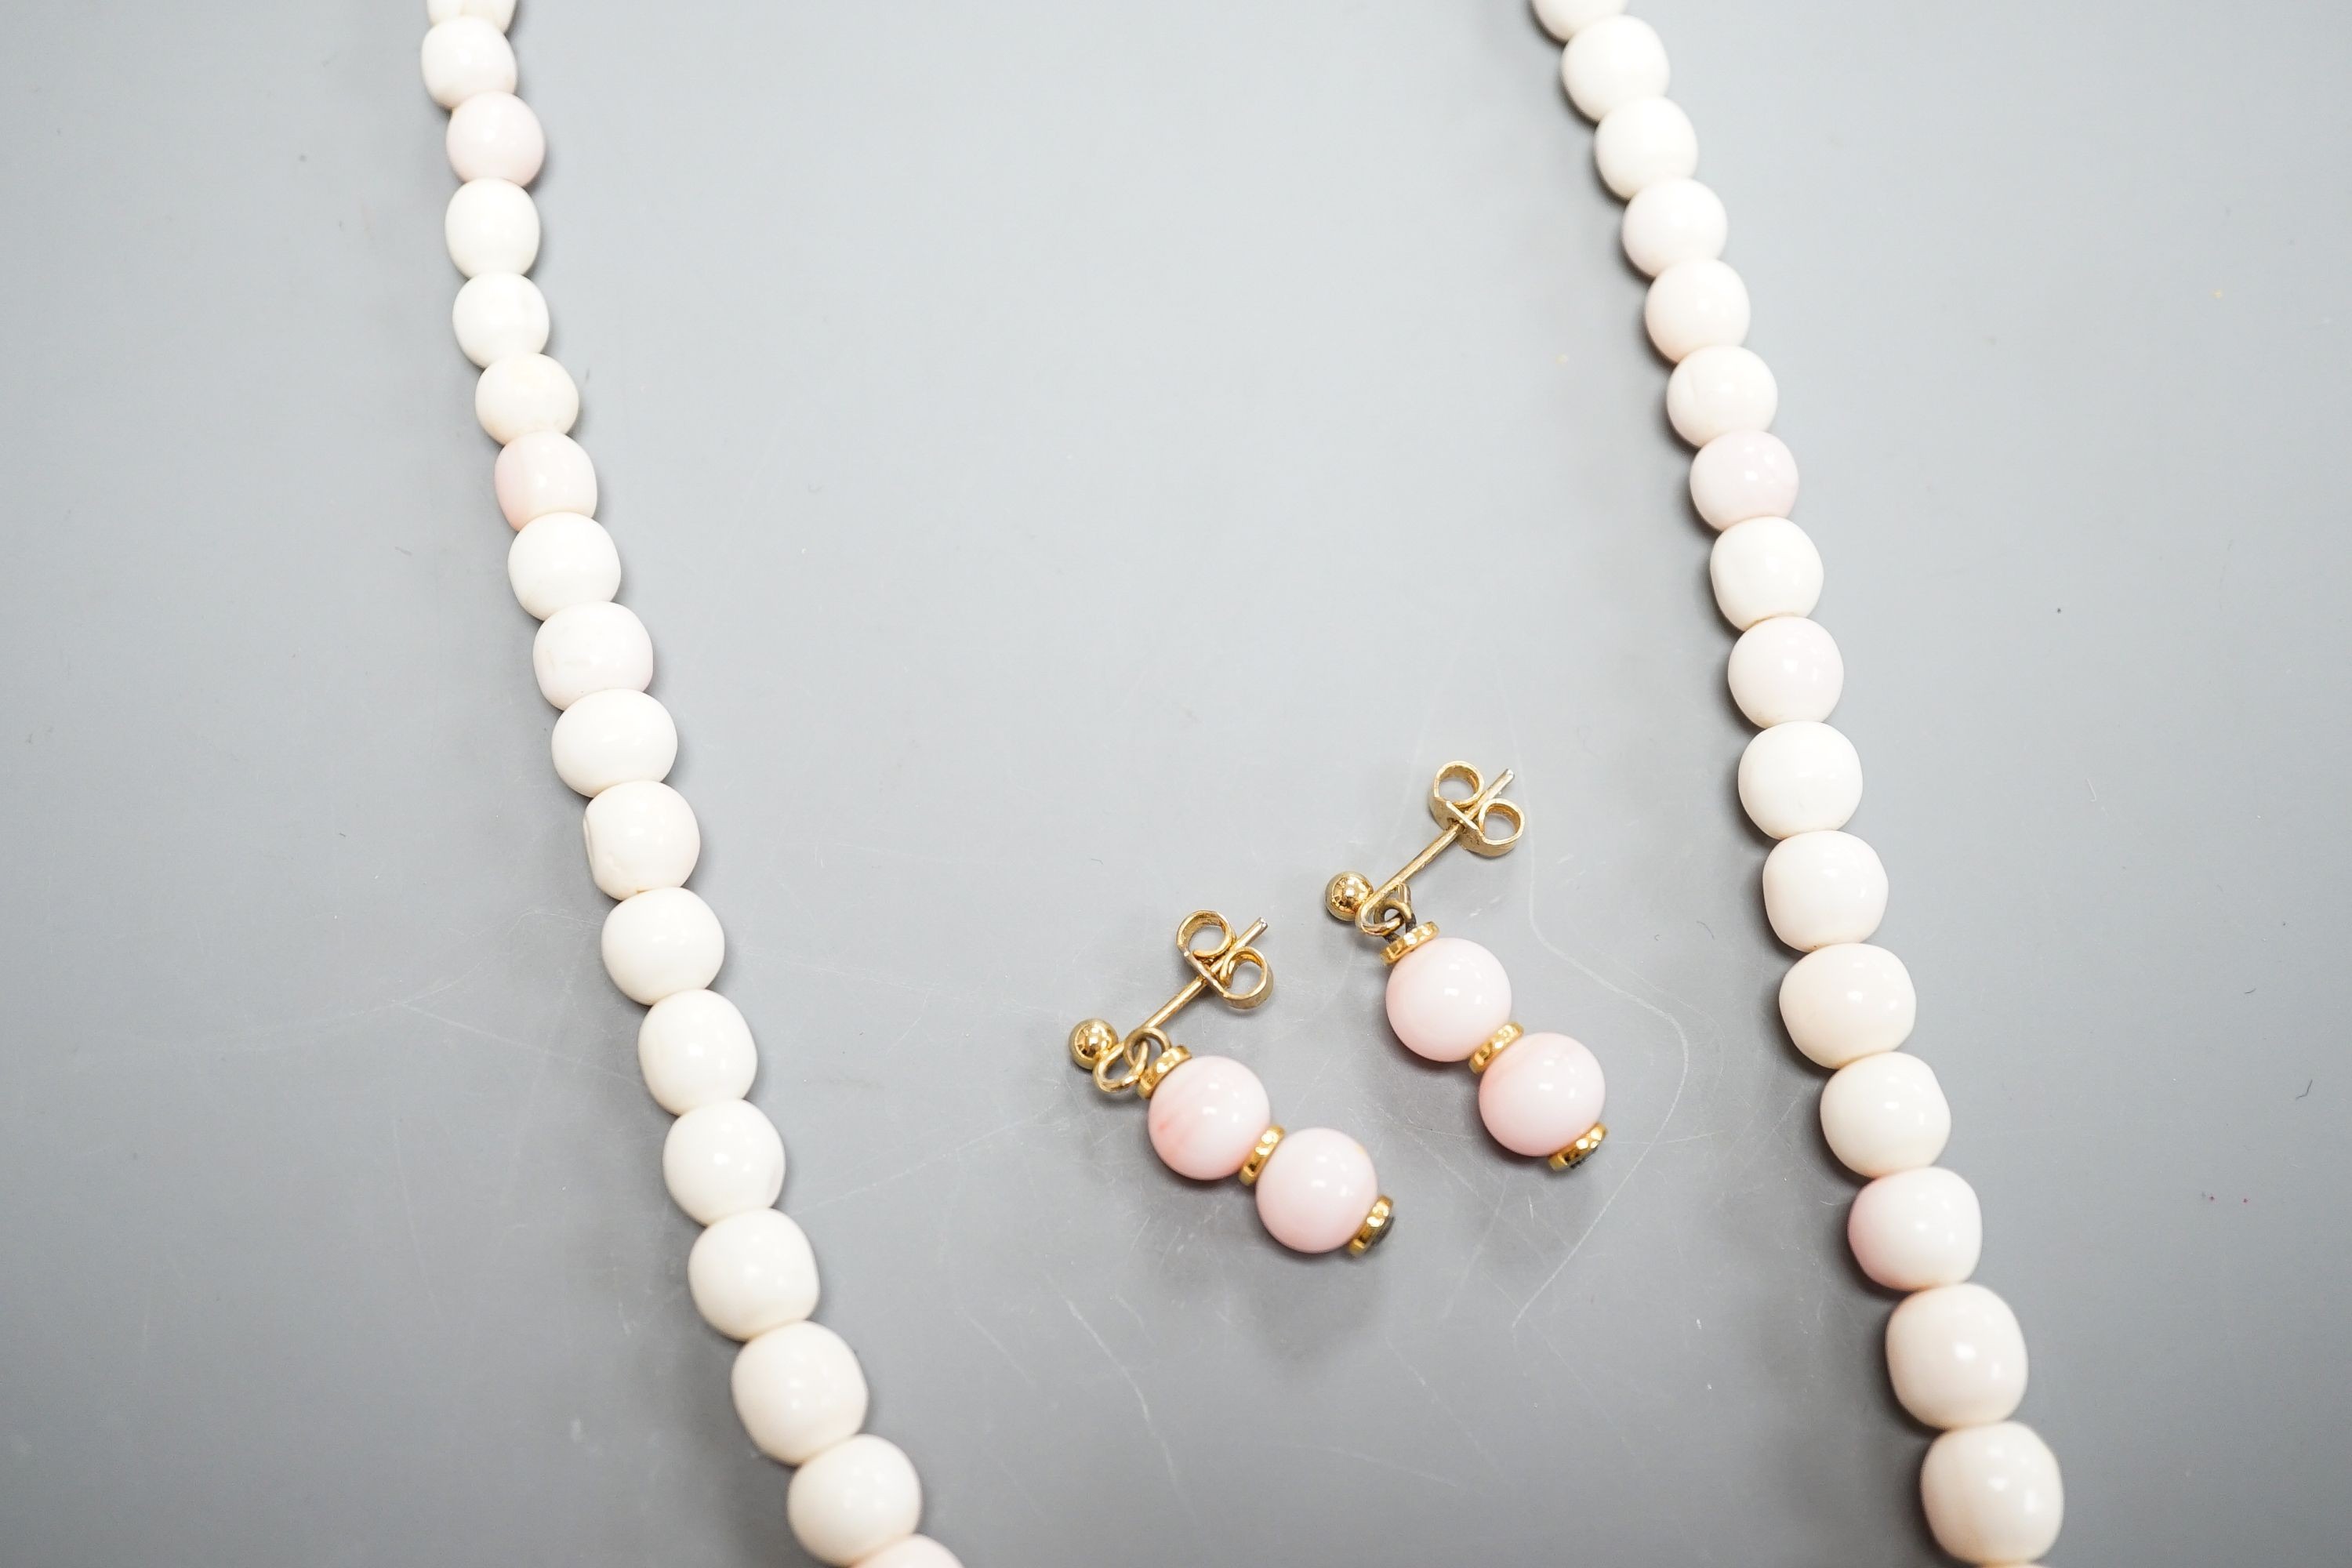 A single strand graduated bleached coral bead necklace, 51cm, gross 43.5 grams and a pair of 750 yellow metal and bleached coral earrings, 24mm, gross 4 grams.